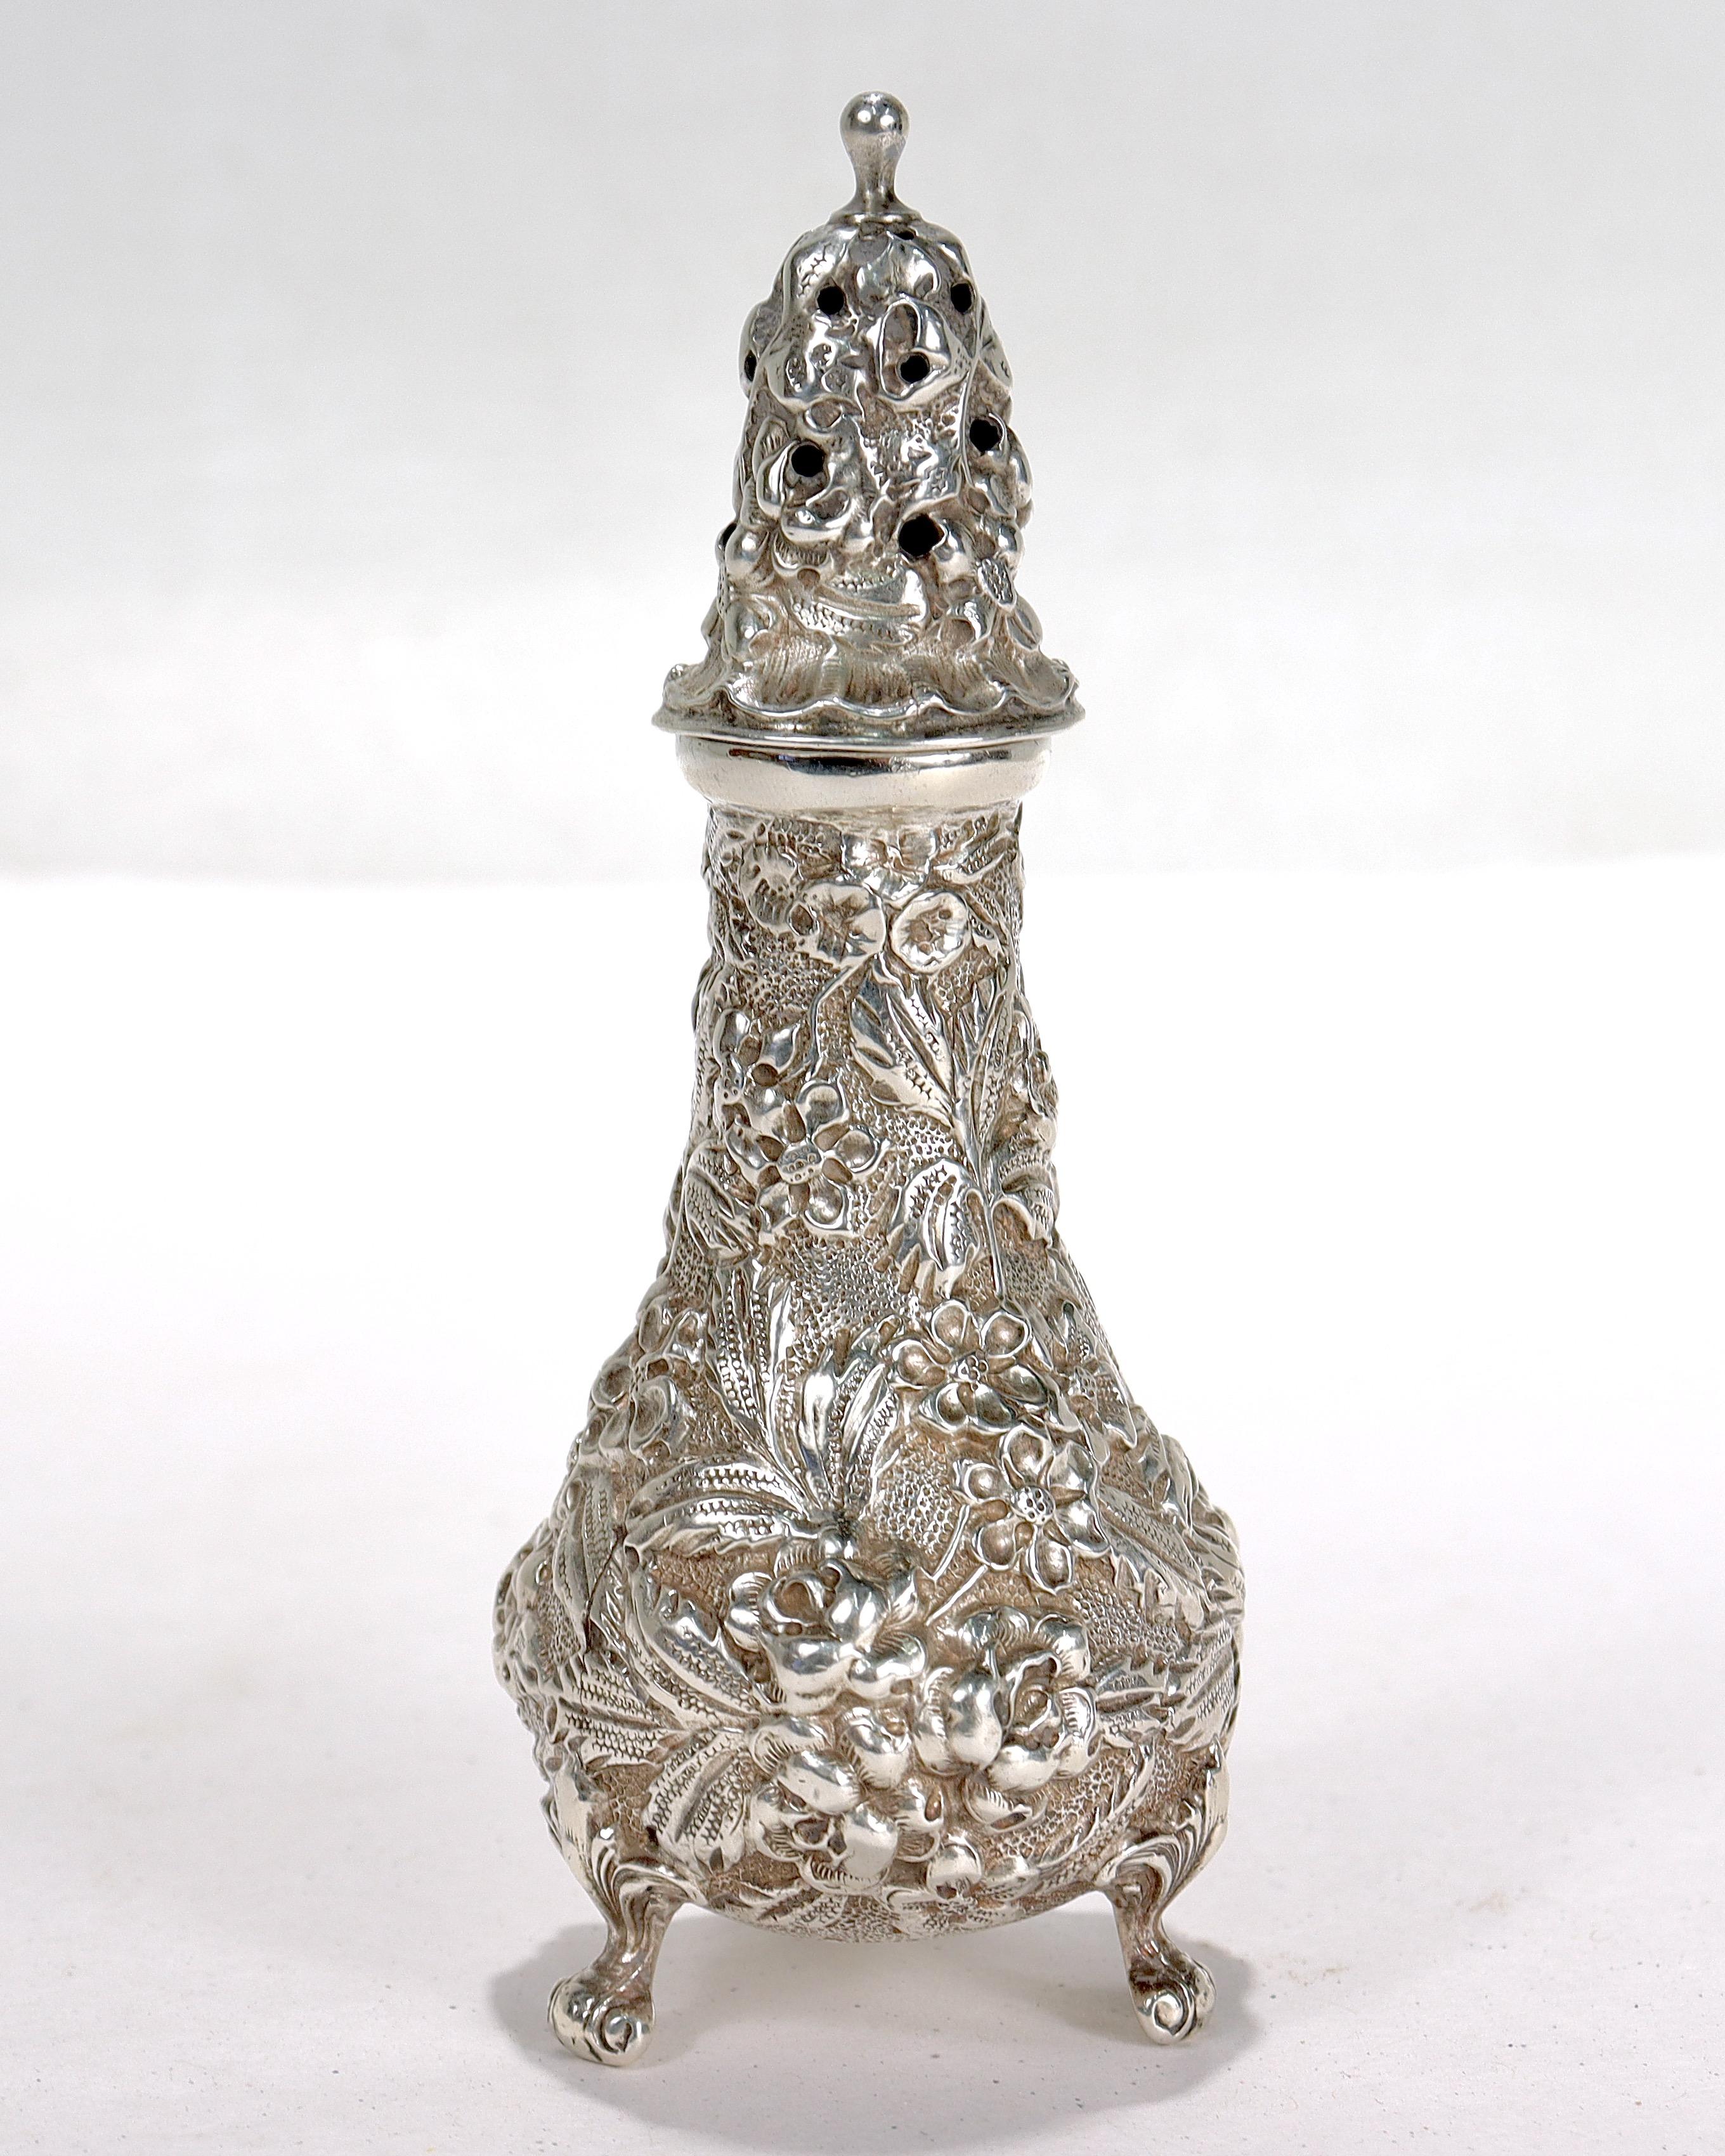 A fine antique silver salt shaker.

In sterling silver.

By Stieff.

With repousse flower decoration throughout and 3 small feet. 

Simply a great salt shaker!

Date:
Early 20th Century

Overall Condition:
It is in overall good, as-pictured, used